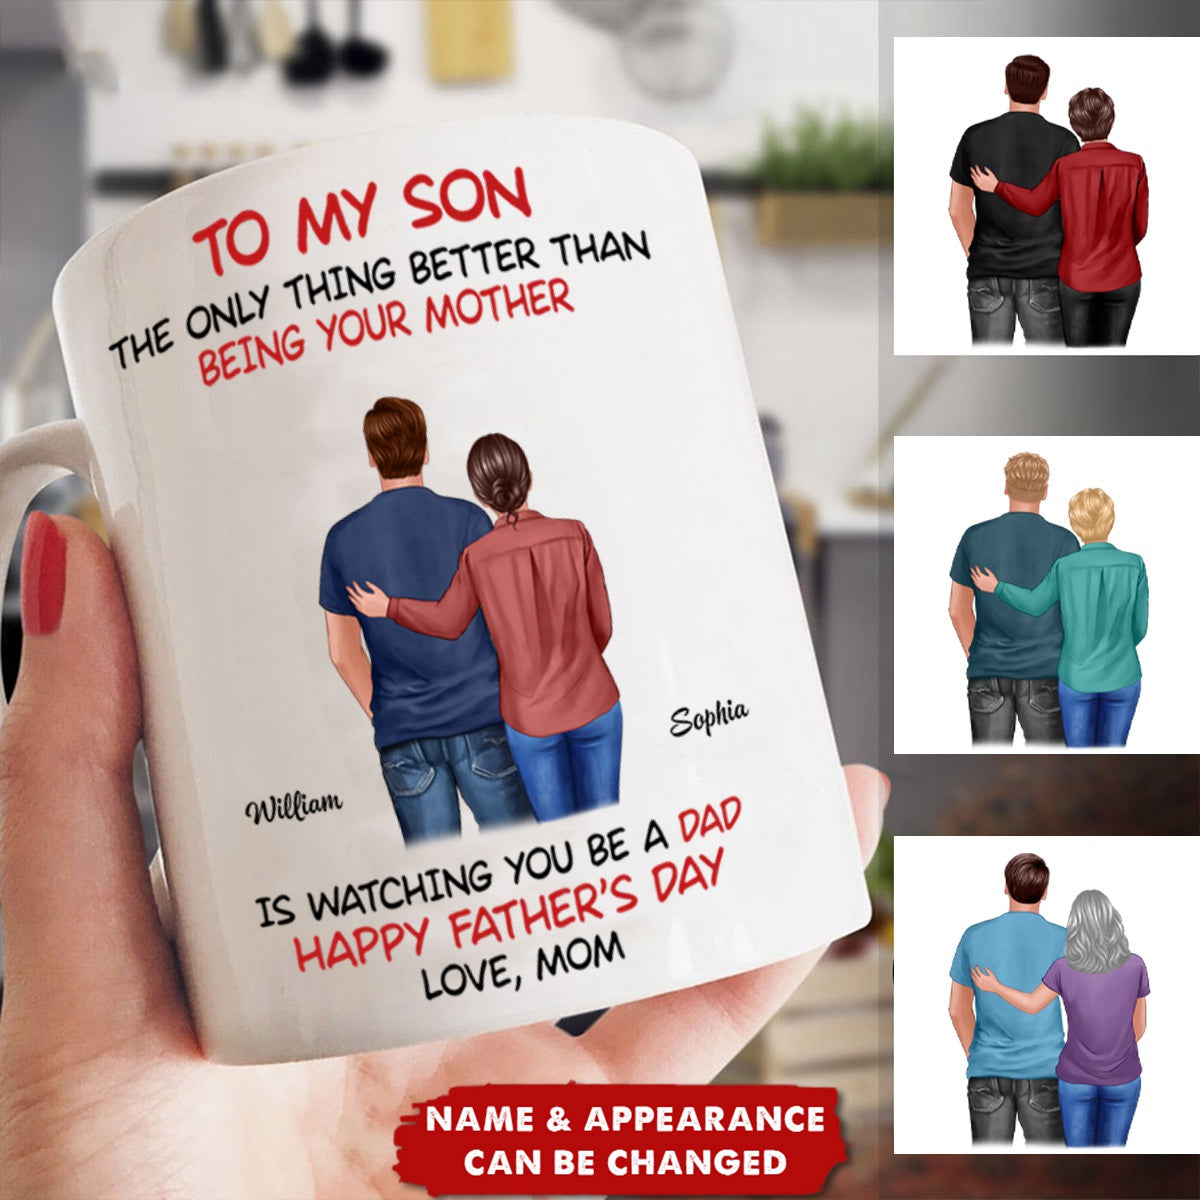 From Mom To Son Happy Father's Day Personalized Ceramic Mug, Coffee Mug, Heartfelt Father's Day Gift For Son